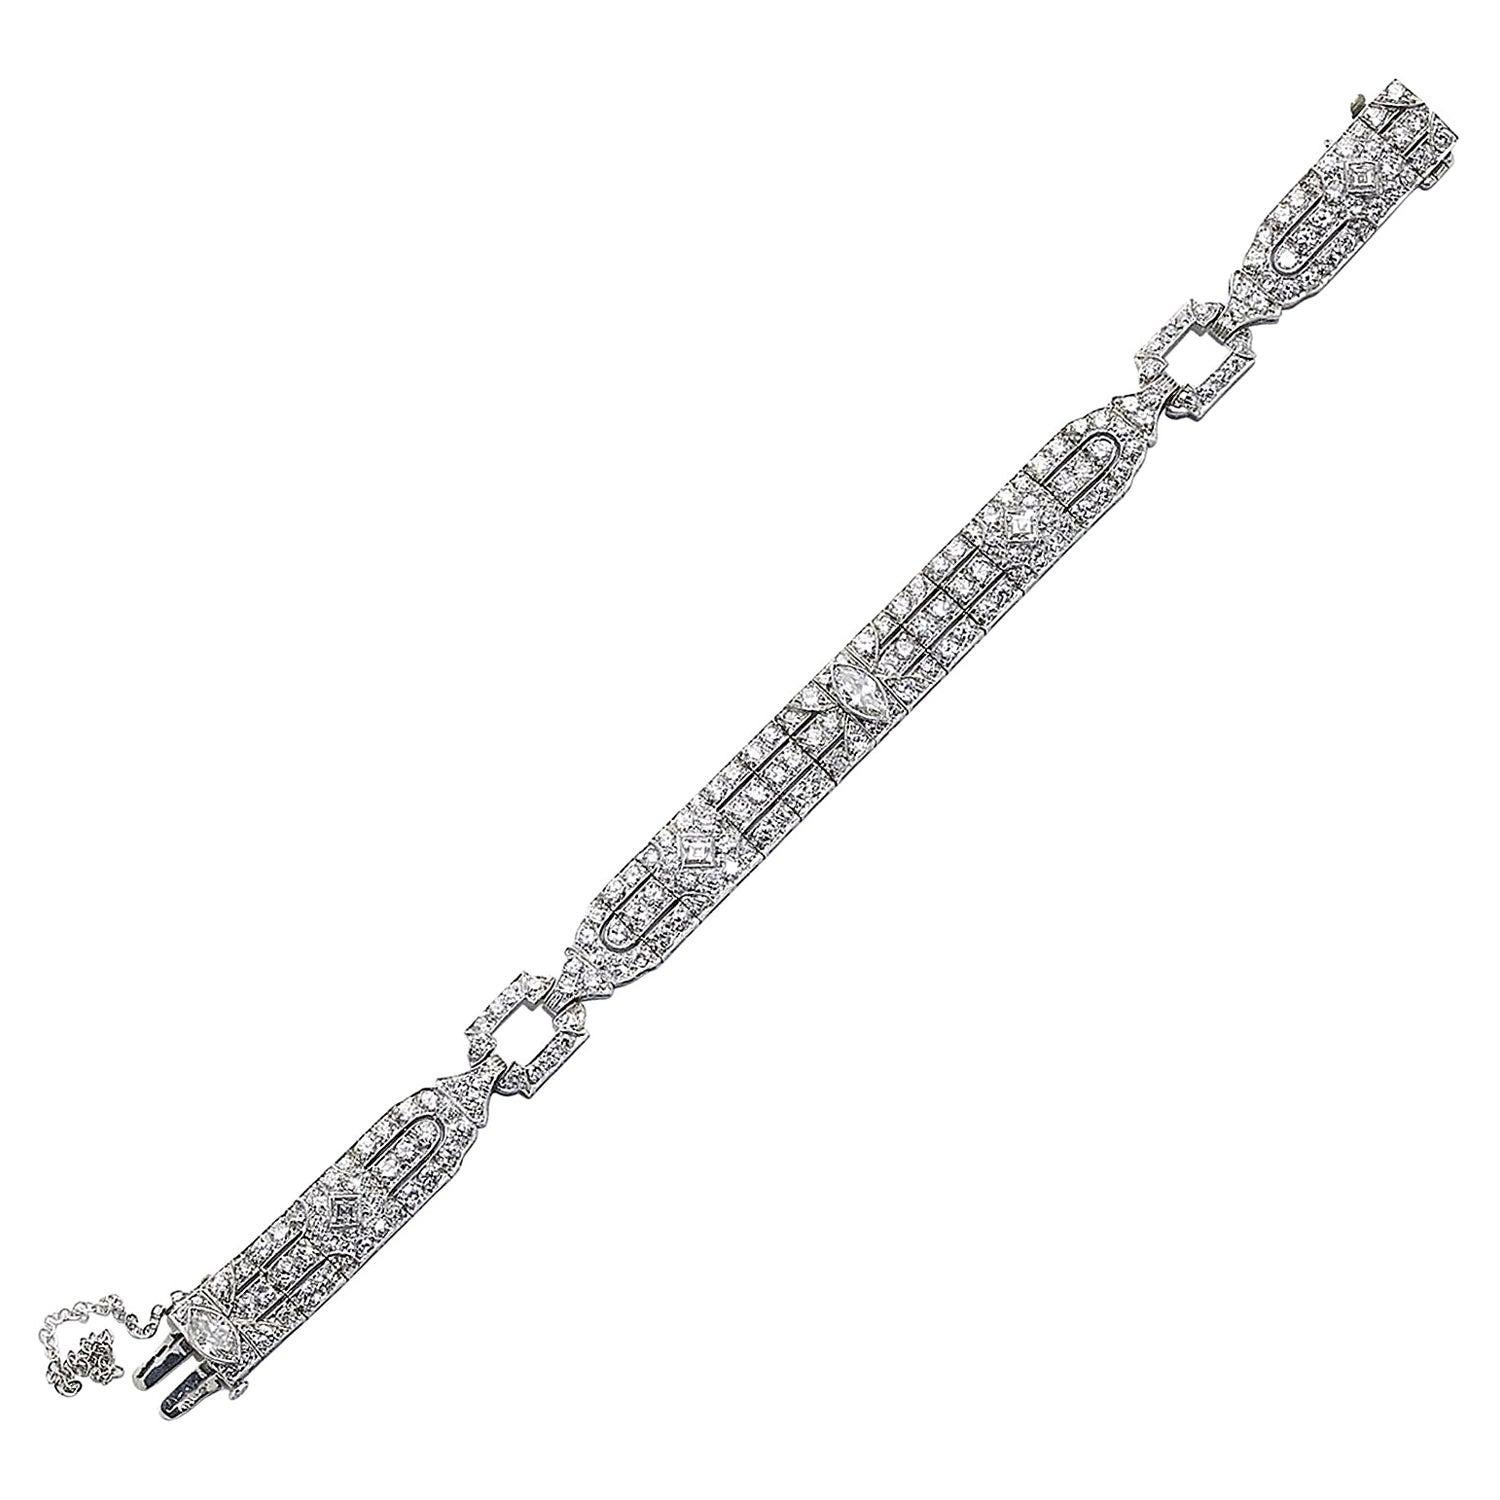 An Art Deco diamond bracelet, by Raymond Yard,  featuring two articulated panel sections, with straight sides and curved ends, with a marquise-cut diamond, rub over set, in the centre of each, flanked by old-cut diamonds, in grain settings, forming